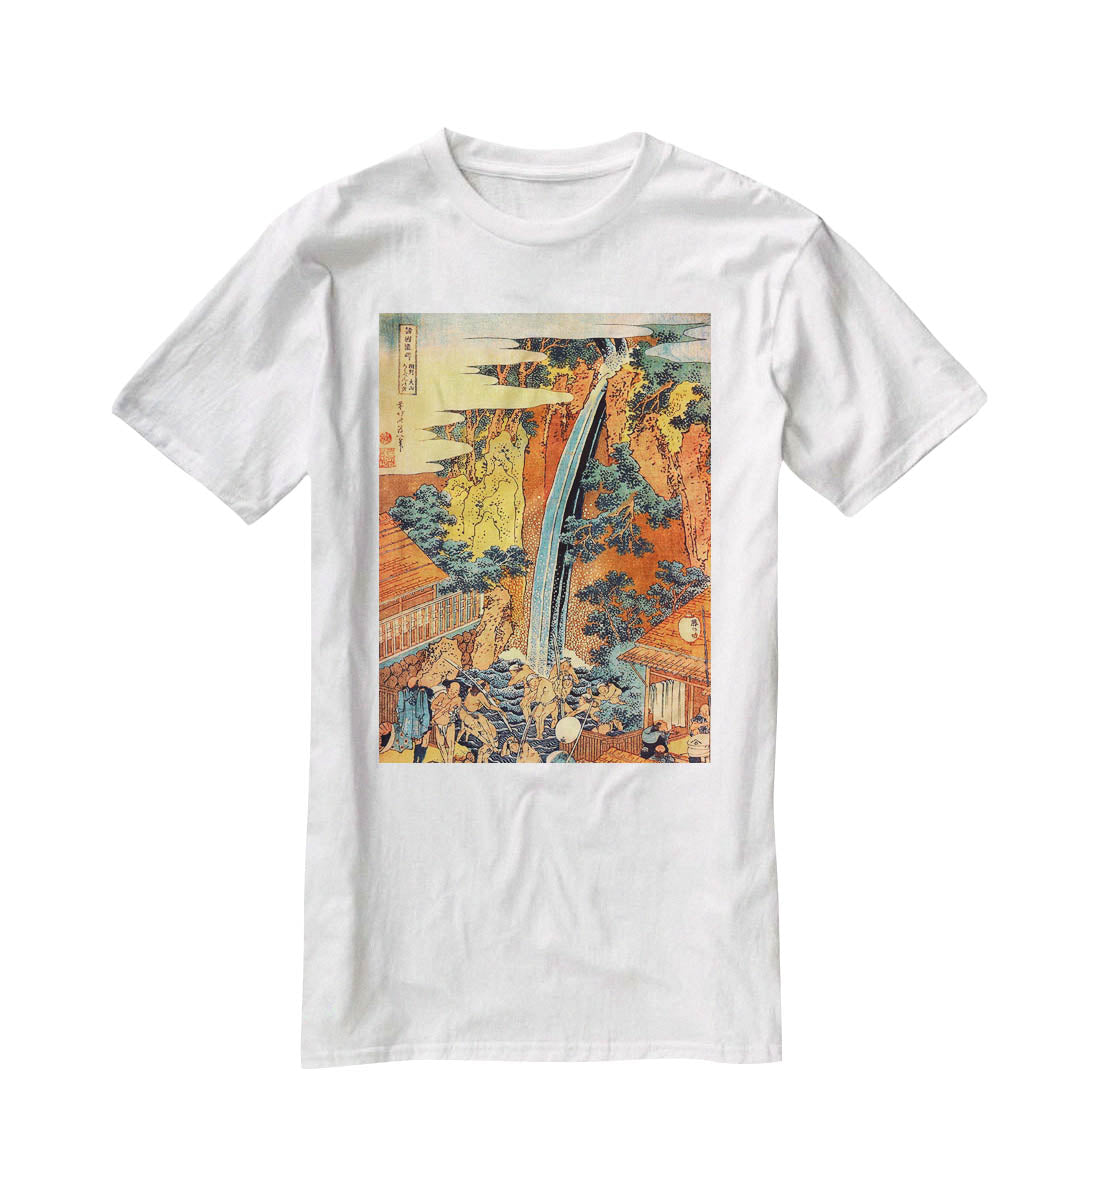 Waterfalls in all provinces 2 by Hokusai T-Shirt - Canvas Art Rocks - 5